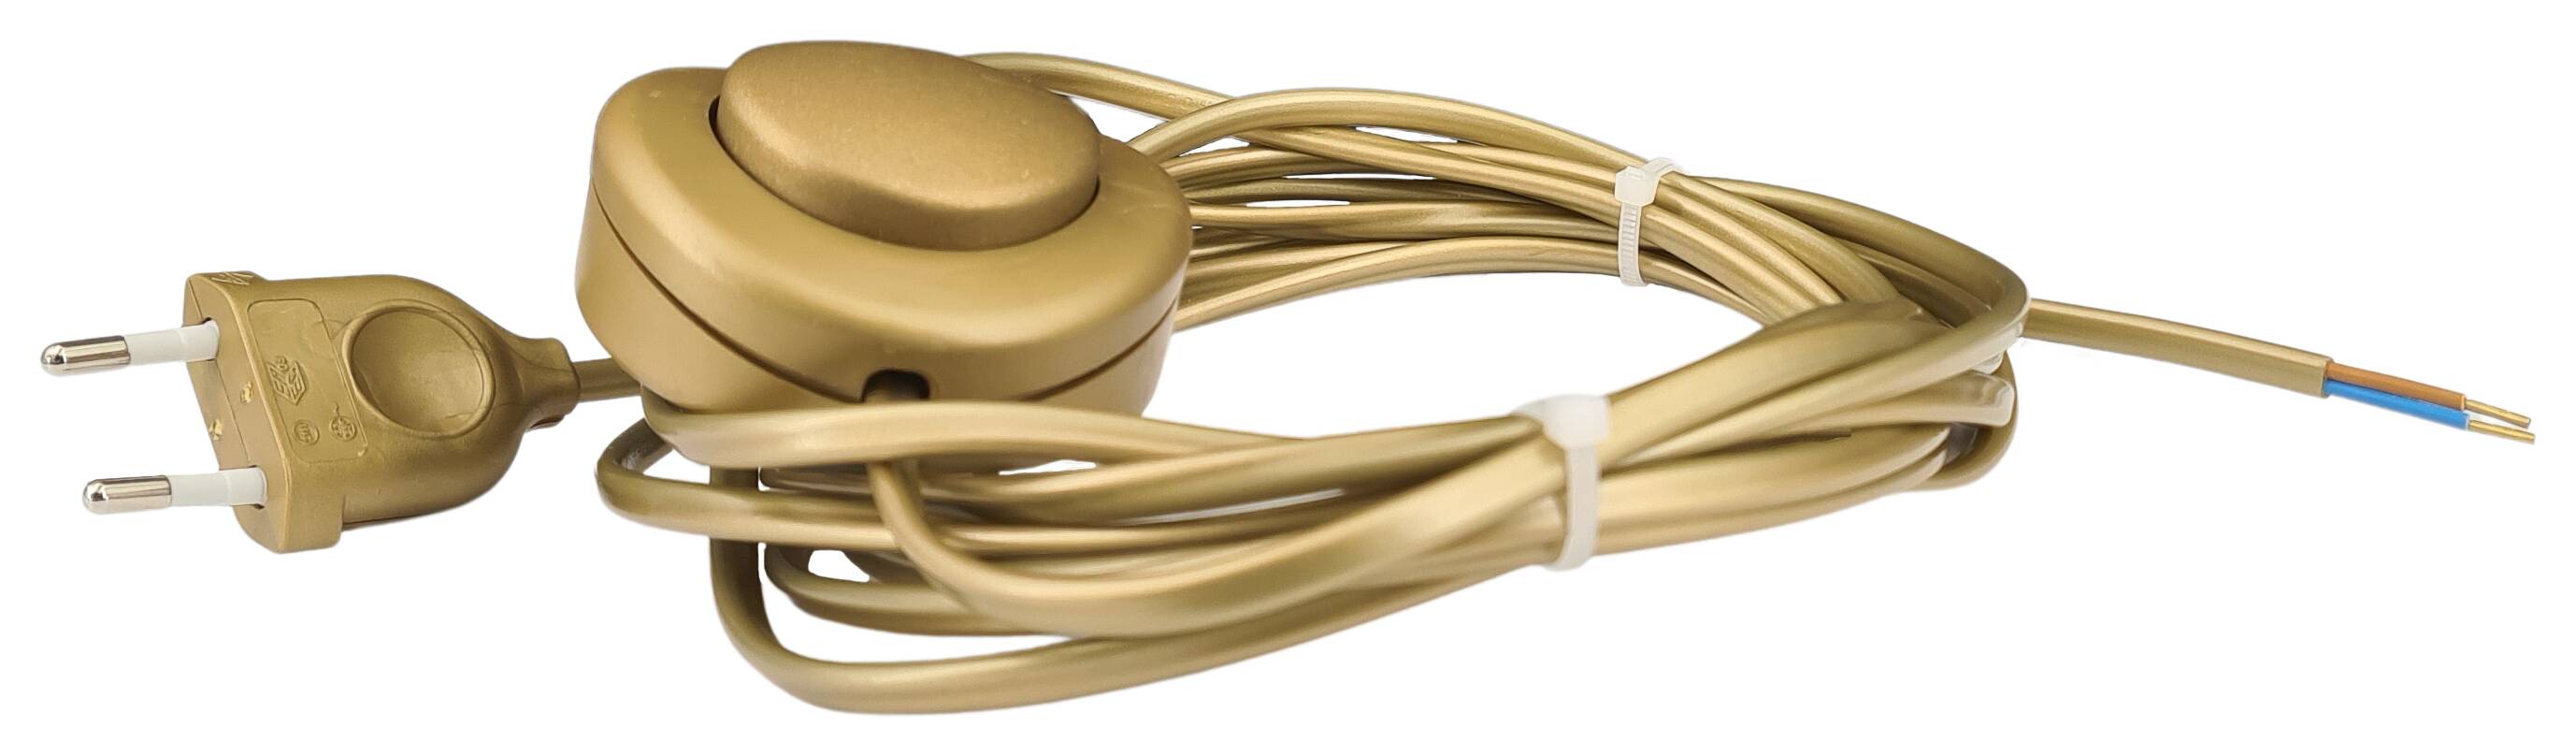 cord-set 2x0,75/4000/2500 flat with Foot switch and Euro plug gold